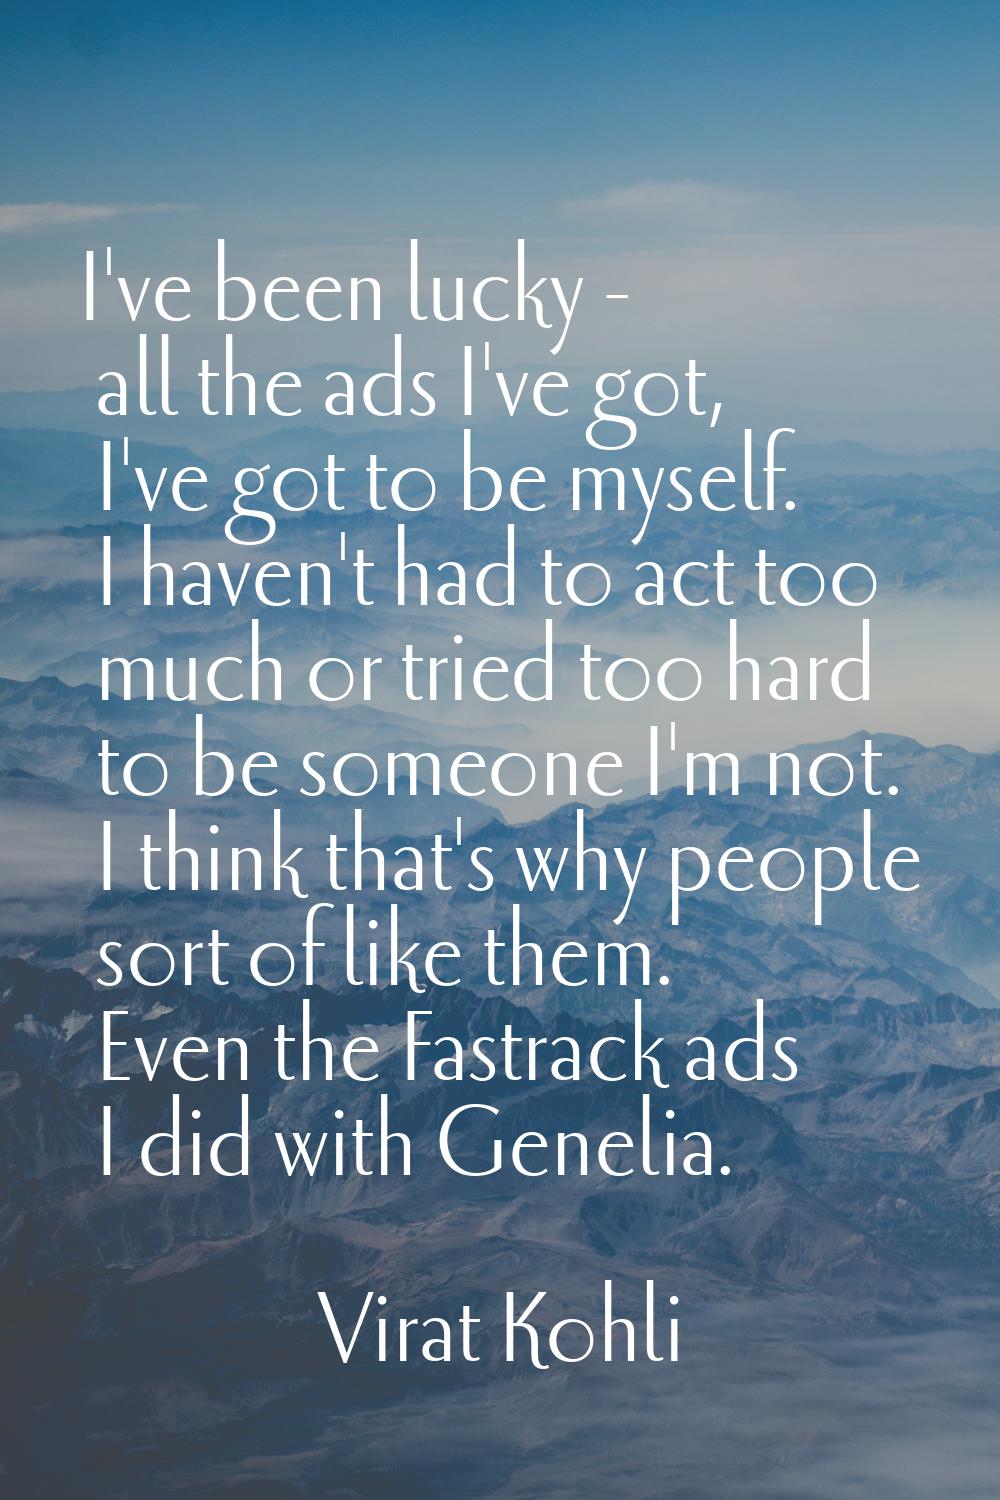 I've been lucky - all the ads I've got, I've got to be myself. I haven't had to act too much or tri